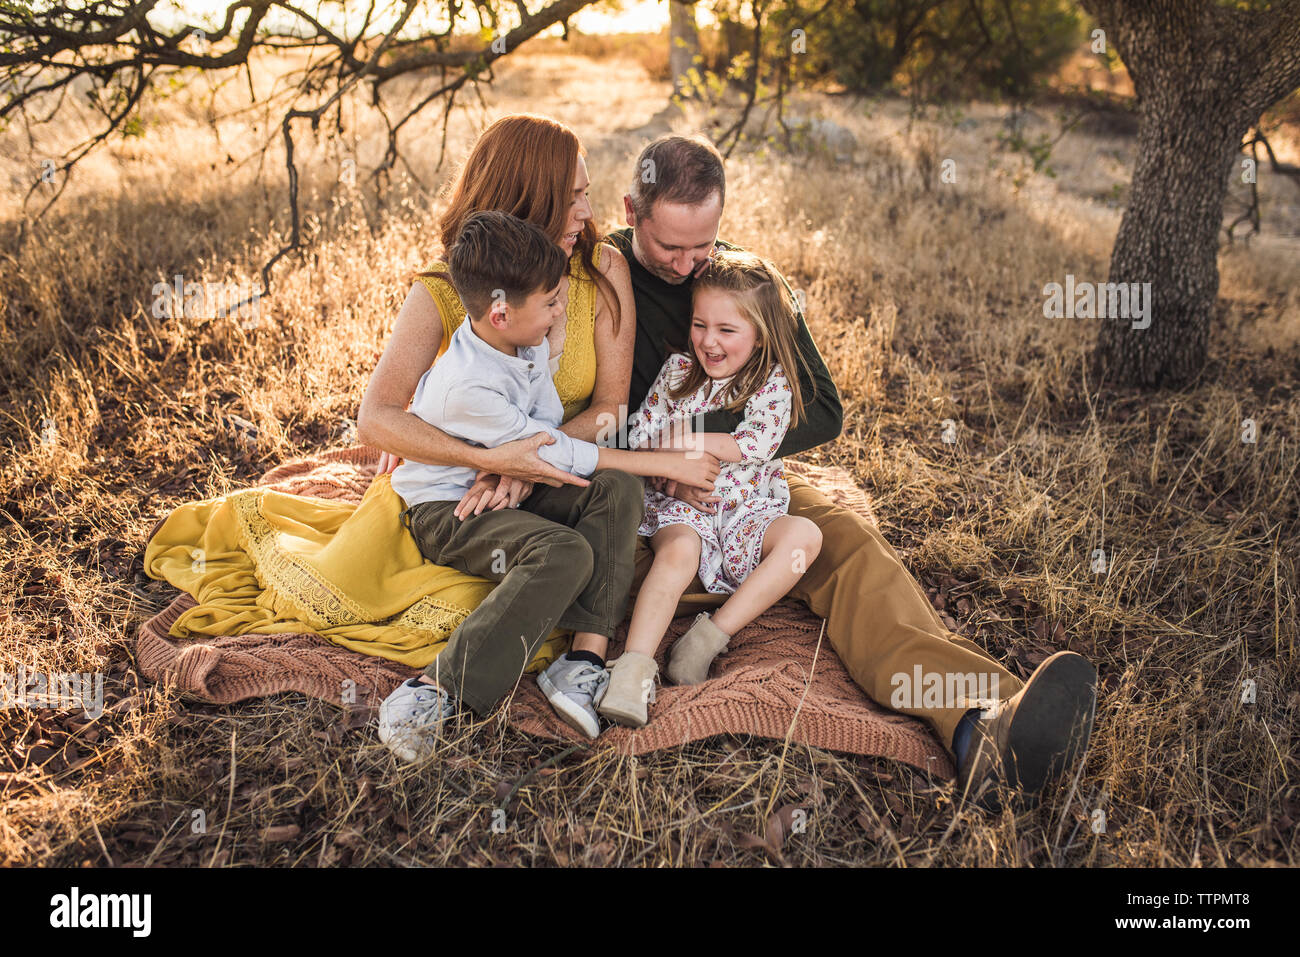 Young family sitting and tickling daughter while embracing/laughing Stock Photo